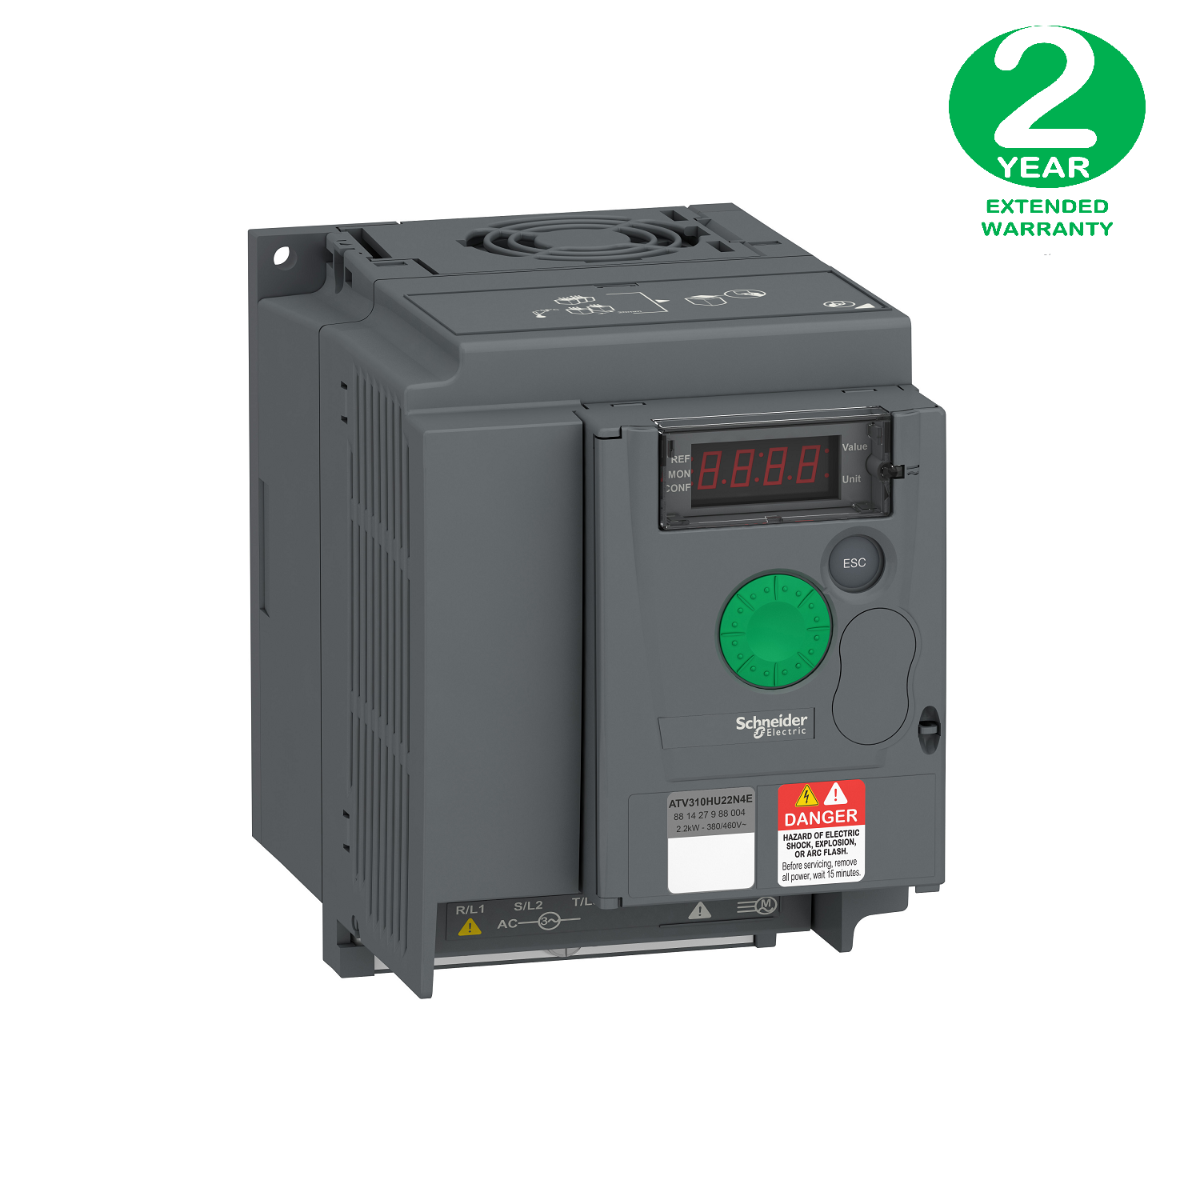 variable speed drive ATV310, 2.2 kW, 3 hp, 380...460 V, 3 phase, without filter + Extended Warranty 2 year